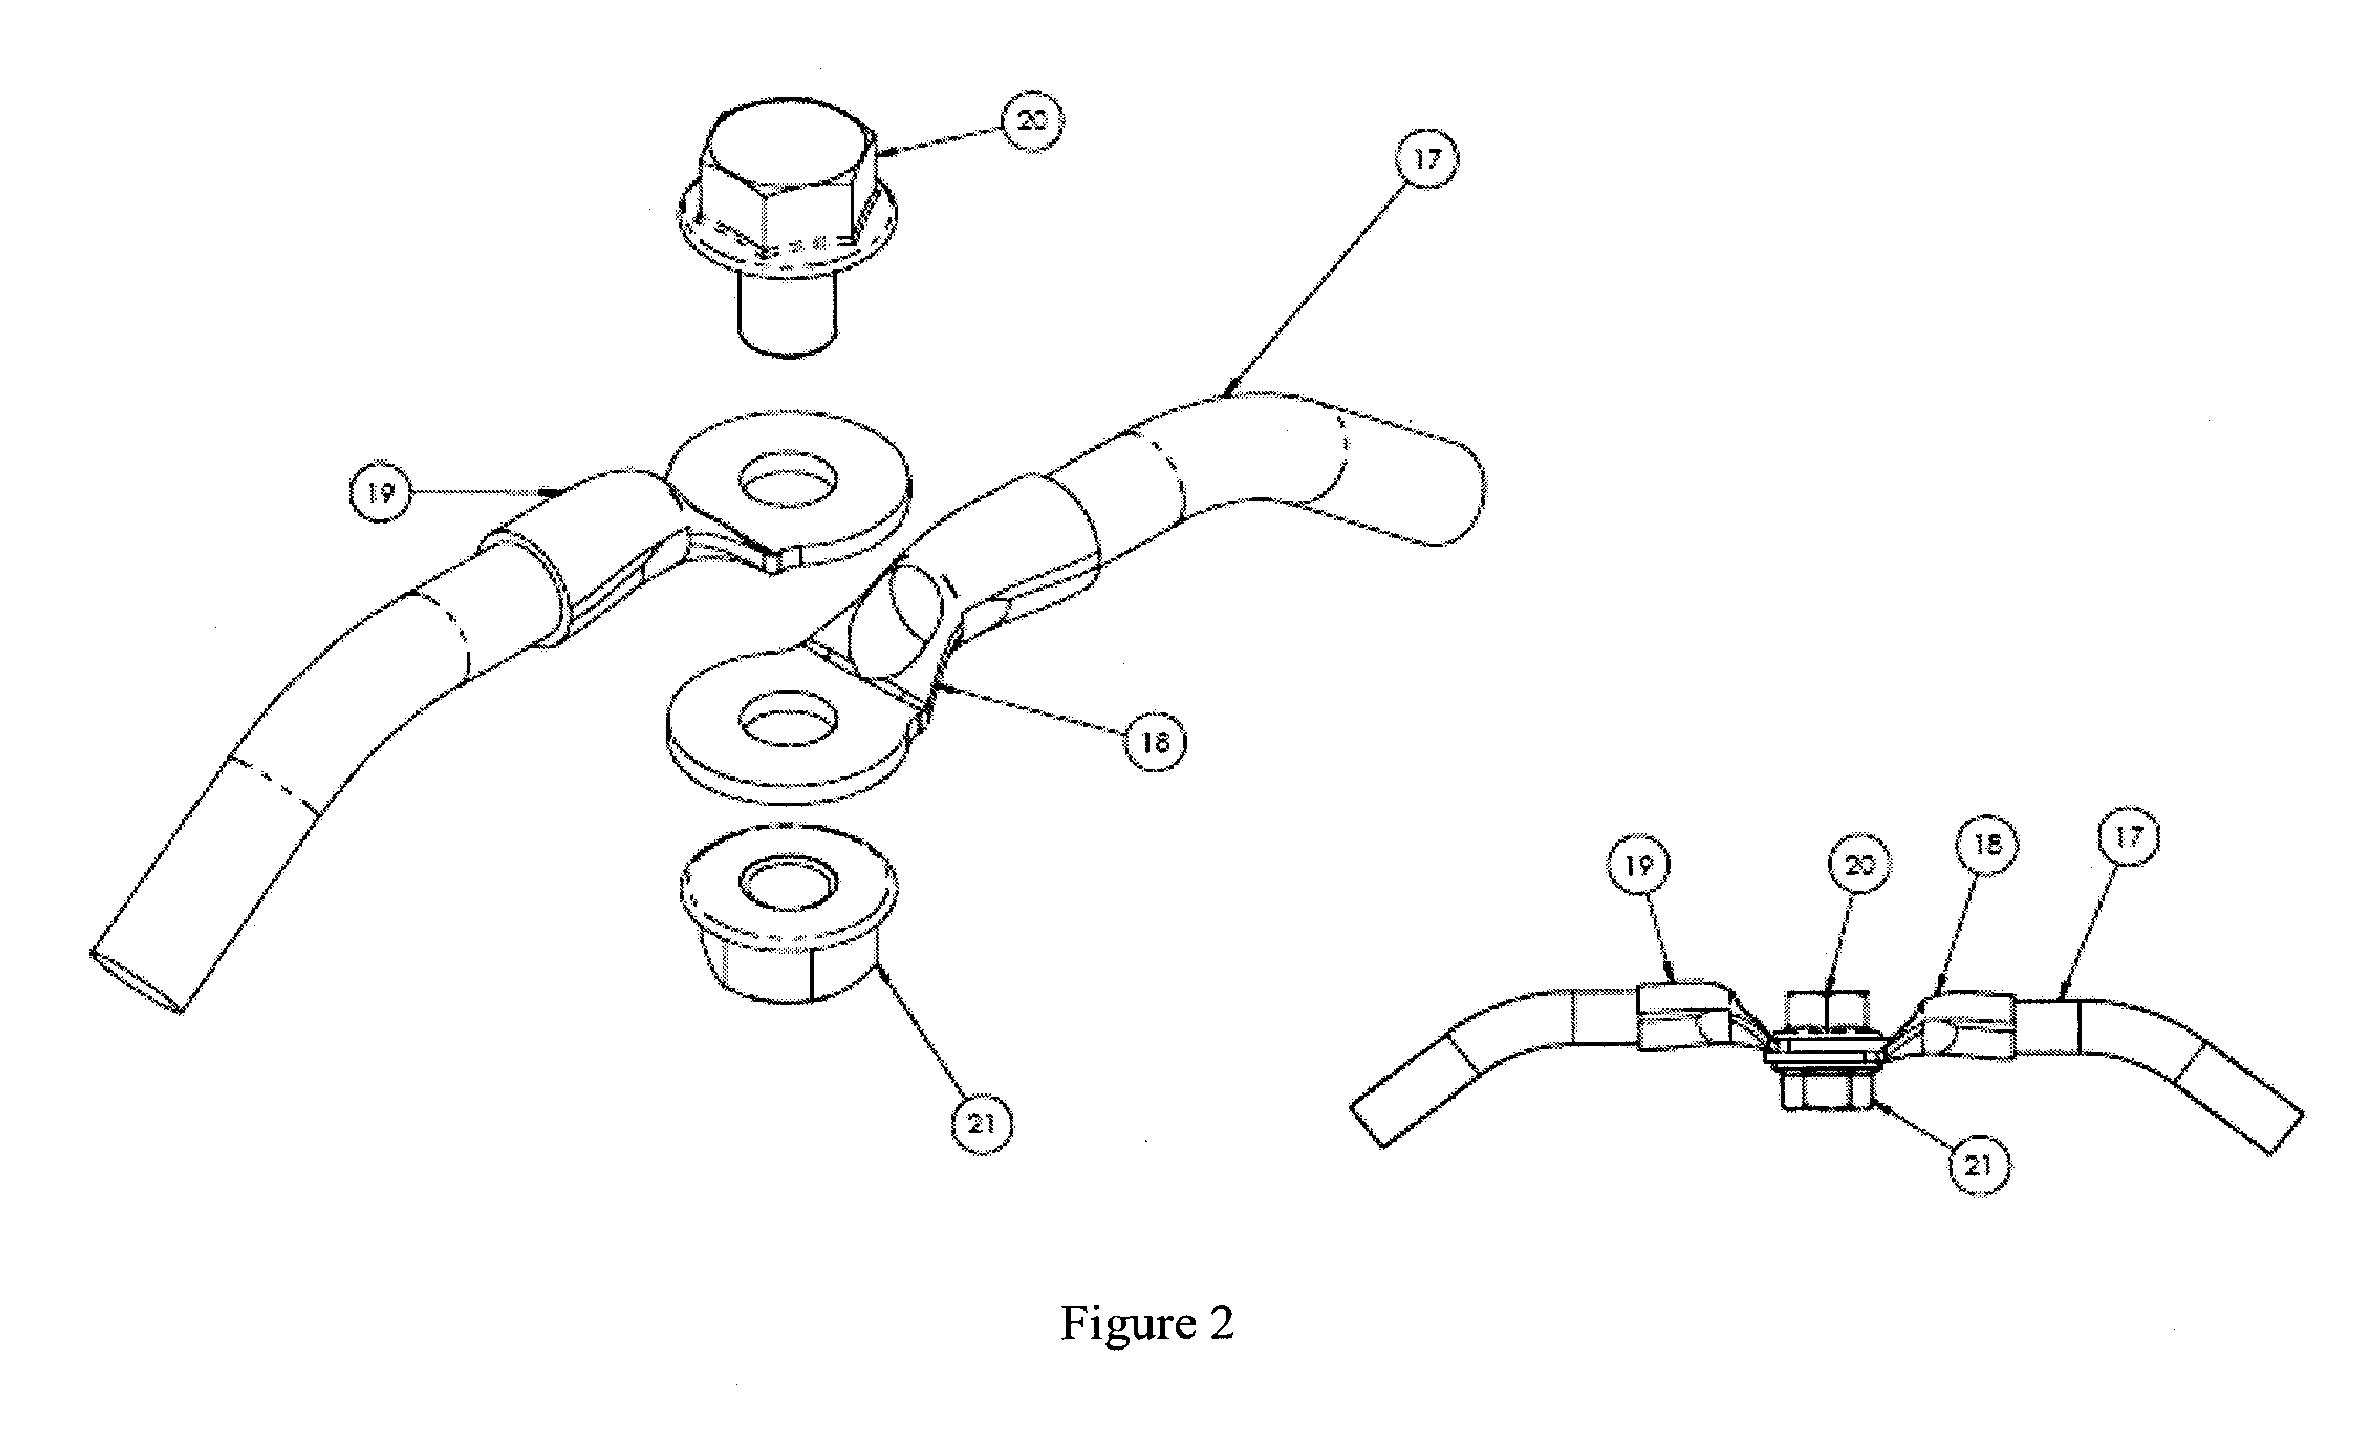 Systems and methods for power connection